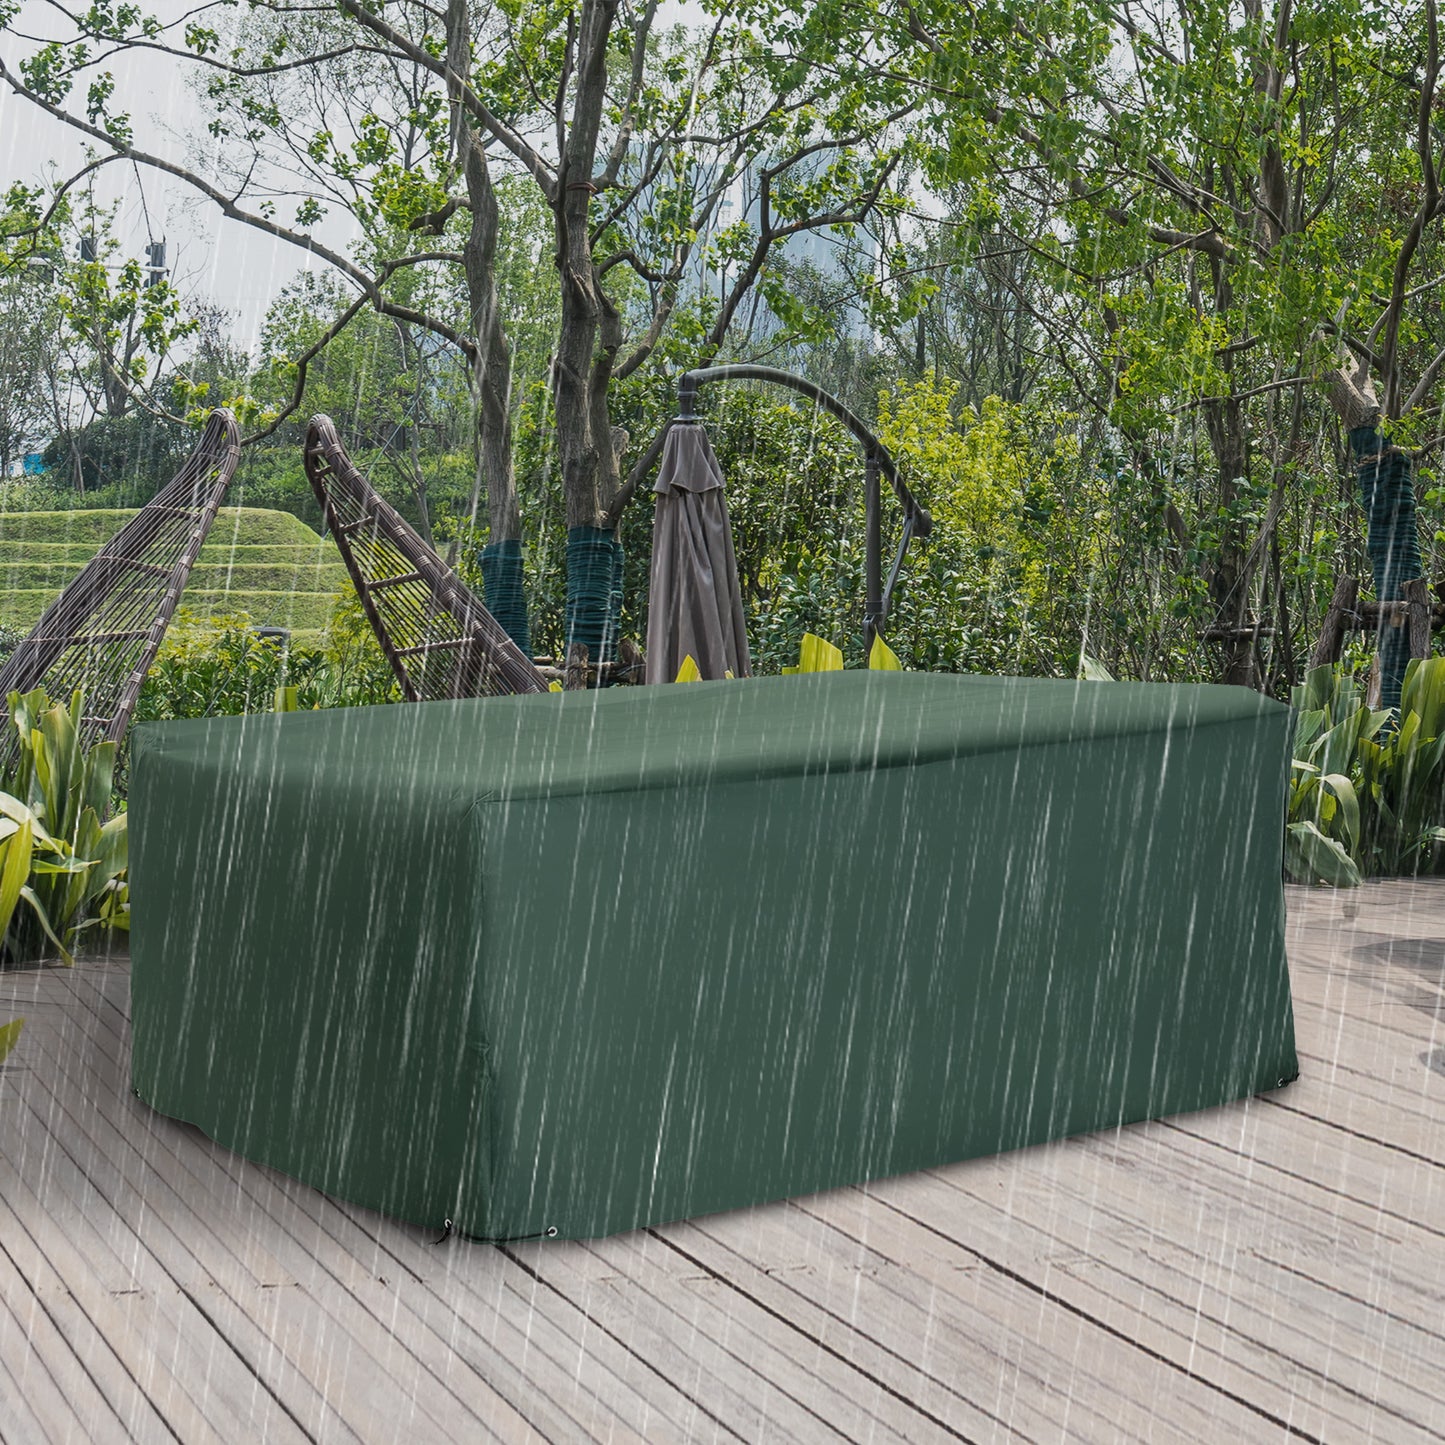 Outsunny UV Rain Protective Rattan Furniture Cover Outdoor Garden Rectangular Furniture Cover Table Chair Sofa Shelter Waterproof 222x155x67cm, Green